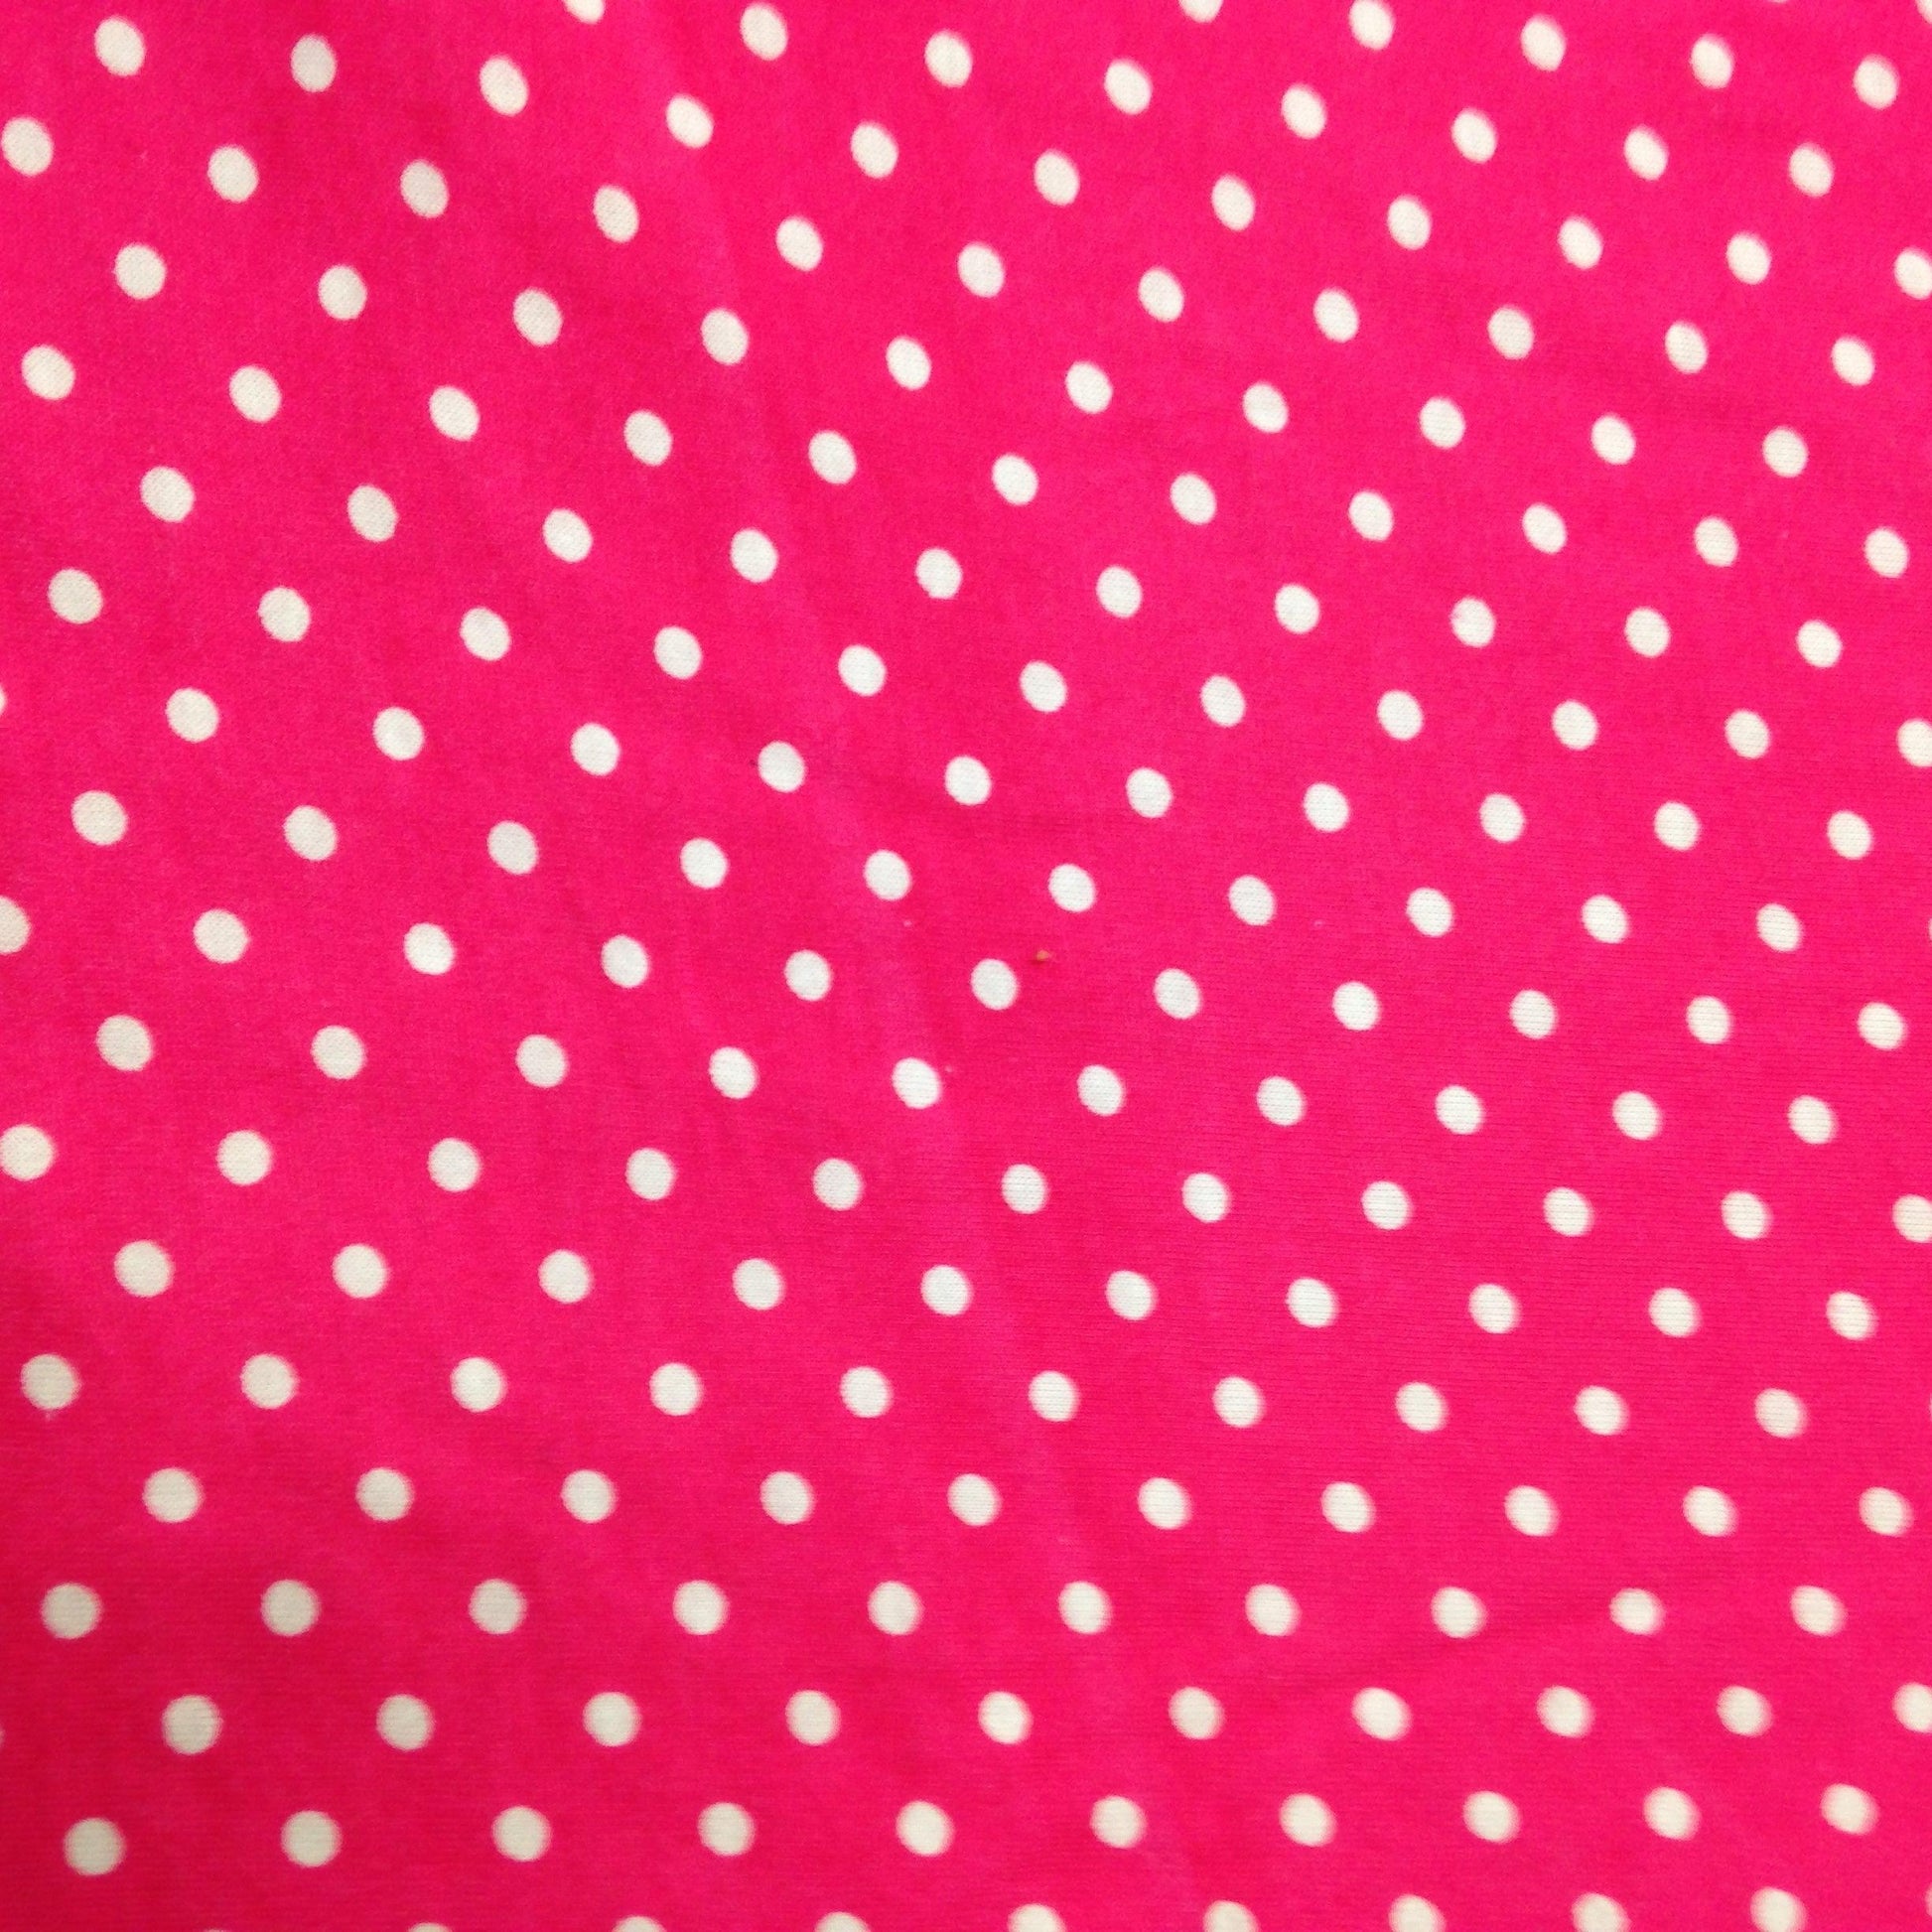 Small White Dots on Hot Pink Cotton/Poly Jersey